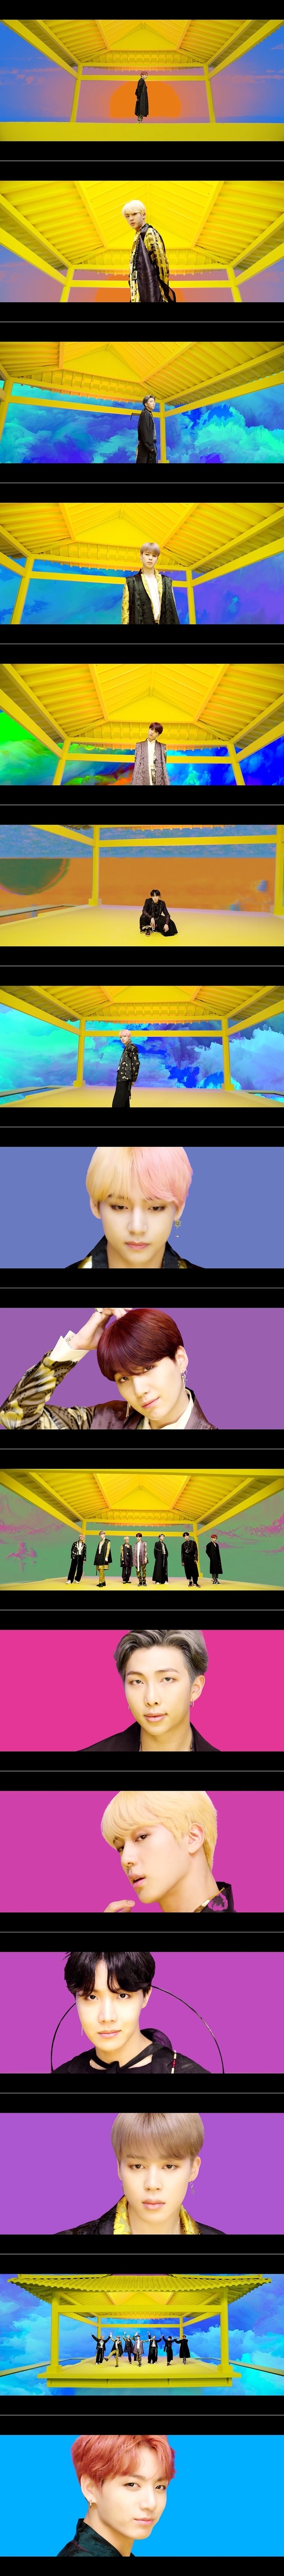 Group BTS (RM, Jean, Suga, Jayhop, Jimin, V, Jungkook) will go on to promote the worlds most hip (slang words meaning new and different).BTS released a teaser video for the new repackage album LOVE YOURSELF Answer (Love Yourself Resolution Anser) title song IDOL, which will be released at 6 pm on August 24 through the official YouTube channel at 0 pm on August 23.It was the first time that the soundtrack and part of the music video were released on this day as well as the title song title.Jay Hop, who predicted that it will be an adventurous and top model album in the behind-the-scenes video of the album jacket released on the 21st, said, We seem to try something new every time. Jimins IDOL is a new song with unprecedented transformation.▲ Idol is a Idol who is wearing a hanbok and dancing on his shoulder.The teaser video begins with Jungkook wearing a hanbok and a back-up.Since then, Jin, RM, Jimin, Suga, Jay Hop, and V have appeared in turn as faces of expressionless faces. All of them appear in Korean traditional costume hanbok with luxurious and colorful designs.The change that is not Top Model and experimental is not limited to visuals.The so-called Korean Music Beat made up of Korean traditional musical instruments such as gwari and janggu flowed out and caught the ears. In line with this, RM said, It is also impressive to see the members dancing their shoulders to match the Issu in a traditional structure building created in a colorful visual beauty.All of these changes were beyond the majority of expectations.In addition to IDOL, the new album includes Epiphany, Trivia: Just Dance, Trivia: Love, Trivia: Seesaw, Trivia: Seesaw, Trivia: Seesaw, Trivia: Im Fine (Im Fine) and Answer: Love Myself (Anser: Love Myself) will feature seven new songs.While IDOL and Im Fine have emerged as the most likely title song candidates, many fans predicted that if IDOL is a title, BTS will contain rather dark feelings such as sadness and grievances as well as the joy of living as the top Idol.However, IDOL is more of an exciting and youthful atmosphere than a depressed emotion is laid in the background.▲ No.1 Boy Band shouts Korea at the top of global music marketSinger Kelly Clarkson, who hosted at the 2018 Billboards Music Awards at the United States of Americas MGM Grand Canyon Garden Arena in May, is the worlds premier of BTSs FAKE LOVE world premiere Introducing the stage, he introduced it as the best boy band in World.There was no mention of nationality, which was a proof that World Music fans already recognized and recognized Singer, even if they did not mention their origins.In fact, BTS is a singer who has a long day when he has a new record and breaks the record of K-pop every day.The previous LOVE YOURSELF Tear (before Love Yourself) released in May was the first Korean singer to enter the United States of America Billboards main single chart Hot 100 at number 10.This is the best entry record set by K-pop Singer.At the time, FAKE LOVE topped the Billboards Digital Song Sales in its first week of release, proving that the most downloaded songs in the United States of America over the past week are songs from BTS in Korean, not English.In addition, the main album chart Billboards 200 (Billboard 200) has been the first Korean singer to enter the top spot, followed by the chart (based on the latest chart of Billboards on August 21) for 13 consecutive weeks.If there is no difference, LOVE YOURSELF Answer and IDOL will also be ranked in the top 100 Hot 100 and Billboards 200.It is a reaction that the meaning is more special because it is Koreanness which was introduced at the time of enjoying the hottest popularity at home and abroad.He did not just sing in Korean, but he chose the most Korean things such as Hanbok and Guri, Dunggi-dong Rulerer, Im so sick!Even traditional, but never unfashionable, it was expressed in a sophisticated way.Some Music fans expectation that they will come back with a new song that has become more pop-oriented in the overseas market is a good mistake.As the status of BTS has increased, it is not difficult to expect the interest of overseas music fans who did not know more about Korean traditional culture through this new song.Thanks to BTS adventurous new song, it is also possible to experience the unusual experience of watching the Korean music beats resonate at the top of major global charts such as United States of America Billboards and World iTunes charts.This move is similar to the BTSs process of entering the Billboards.In the case of Cyna Seel, who has been active in the local market with high performance on the Billboards main chart recently, he was helped by local management Midas Hand scooter brown, who unearthed World musician Justin Bieber for a sure local attack ahead of full-scale United States of America.He also attracted attention by releasing songs made up of English lyrics.On the other hand, in the case of BTS, there was no promotion in the local area, and there was no song in English, but it was analyzed that the music genre, which is loved by the local community, and the music that melted the message beyond the border, led to the forced entry into the local area.It is also worth looking forward to the Dung-dong-dong-ruller that will be resonated at large concert halls overseas.BTS plans to release its new song stage for the first time at the LOVE YOURSELF Seoul performance, which will be held at the main stadium of Jamsil Sports Complex in Songpa-gu, Seoul on the 25th and 26th, the day after the albums release.Through this two-time show, 45,000 people will be mobilized per episode and a total of 90,000 people will be mobilized for two days.A total of 790,000 audiences in 16 cities, including North America, Europe and Japan, will sing along with Korean melody and lyrics in a single voice, which will be a special scene for everyone.hwang hye-jin